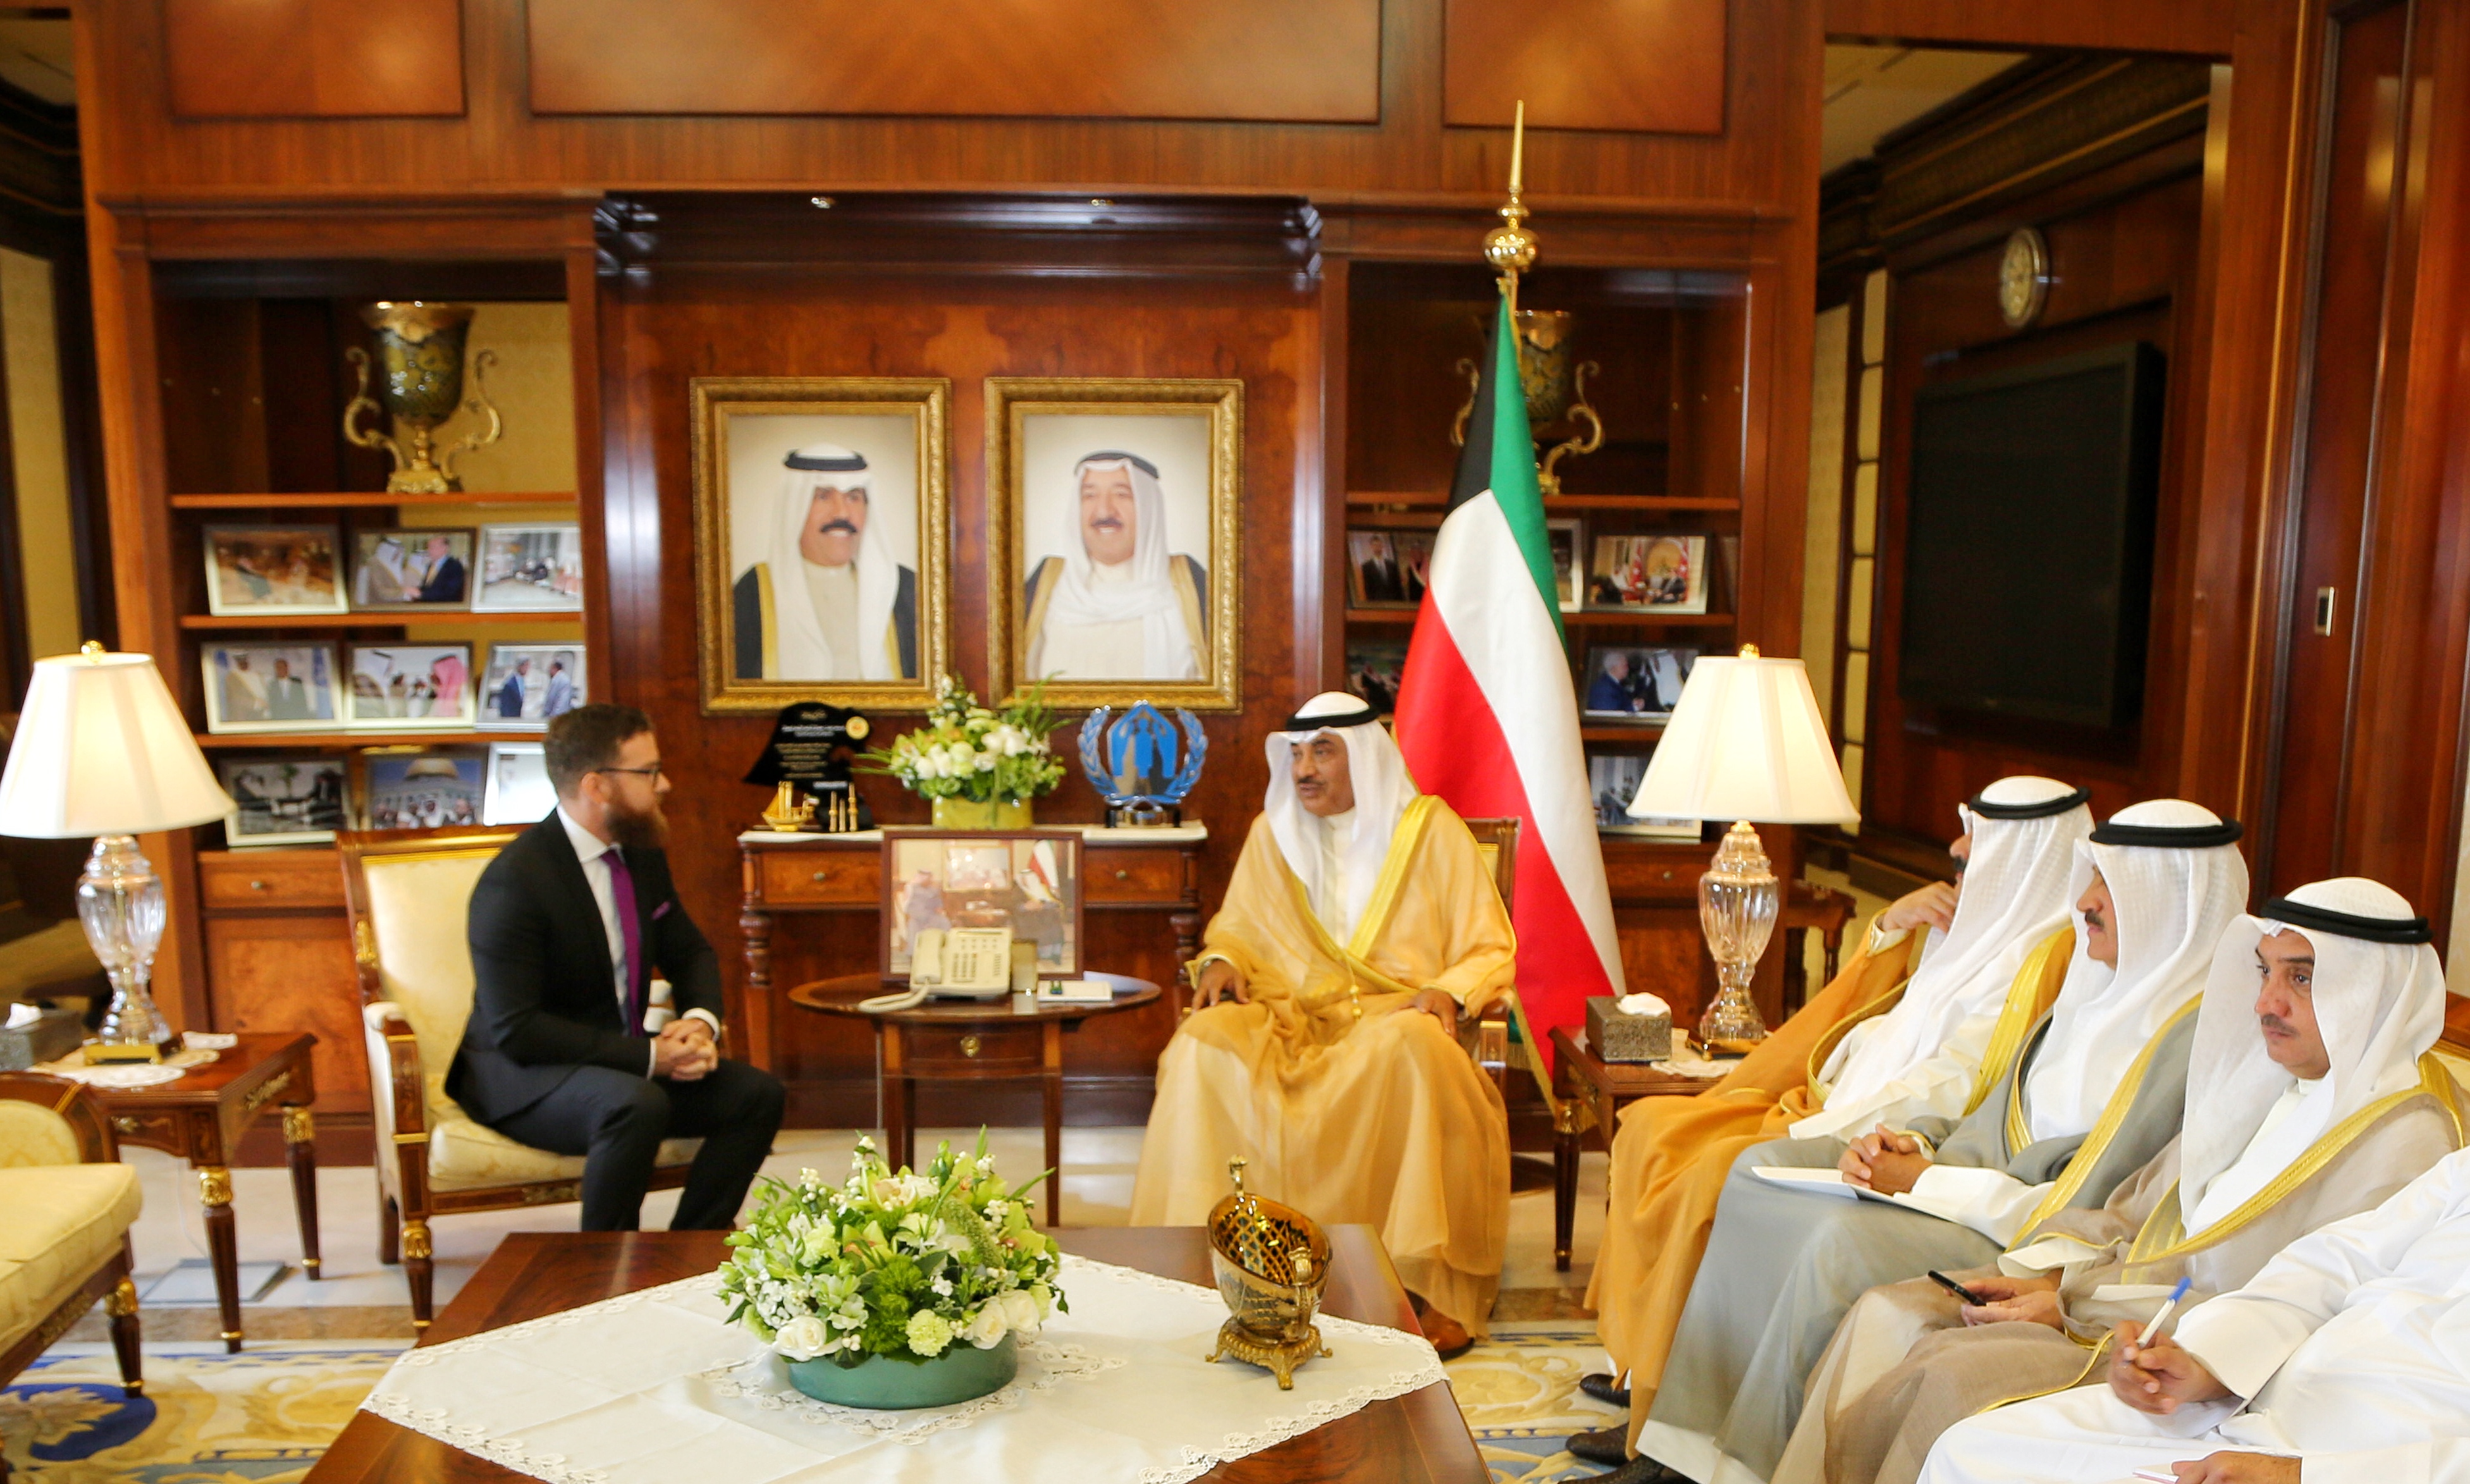 Deputy Prime Minister and Minister of Foreign Affairs Sheikh Sabah Al-Khaled Al-Hamad Al-Sabah receives the credentials of the newly appointed Hungary Ambassador to Kuwait